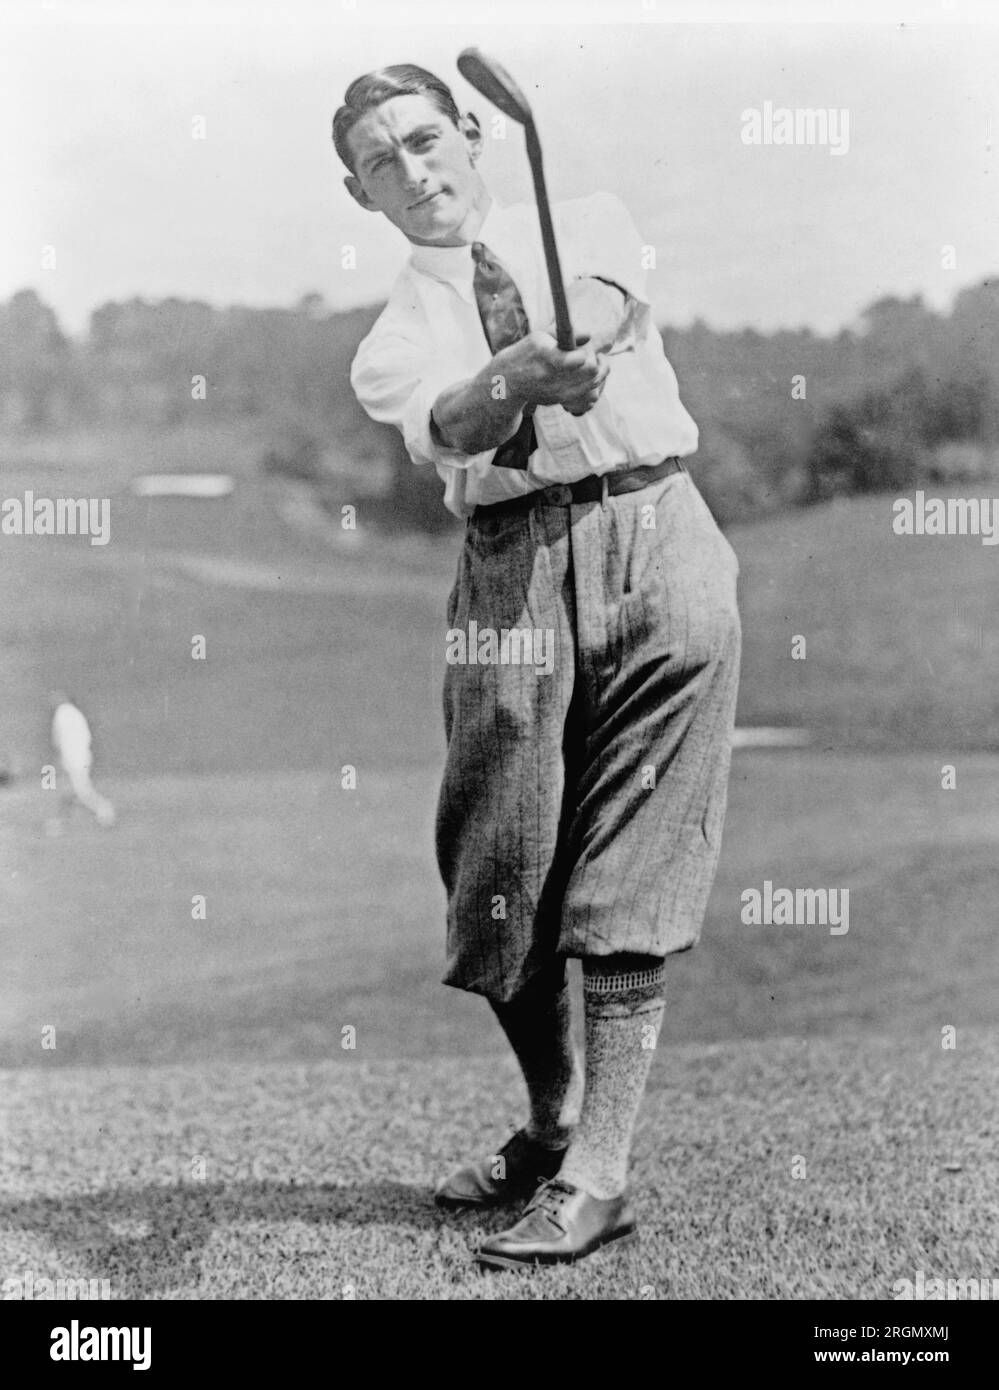 Vintage Golf: Tommy Armour, full-length portrait, facing front, swinging golf club ca. 1927 Stock Photo